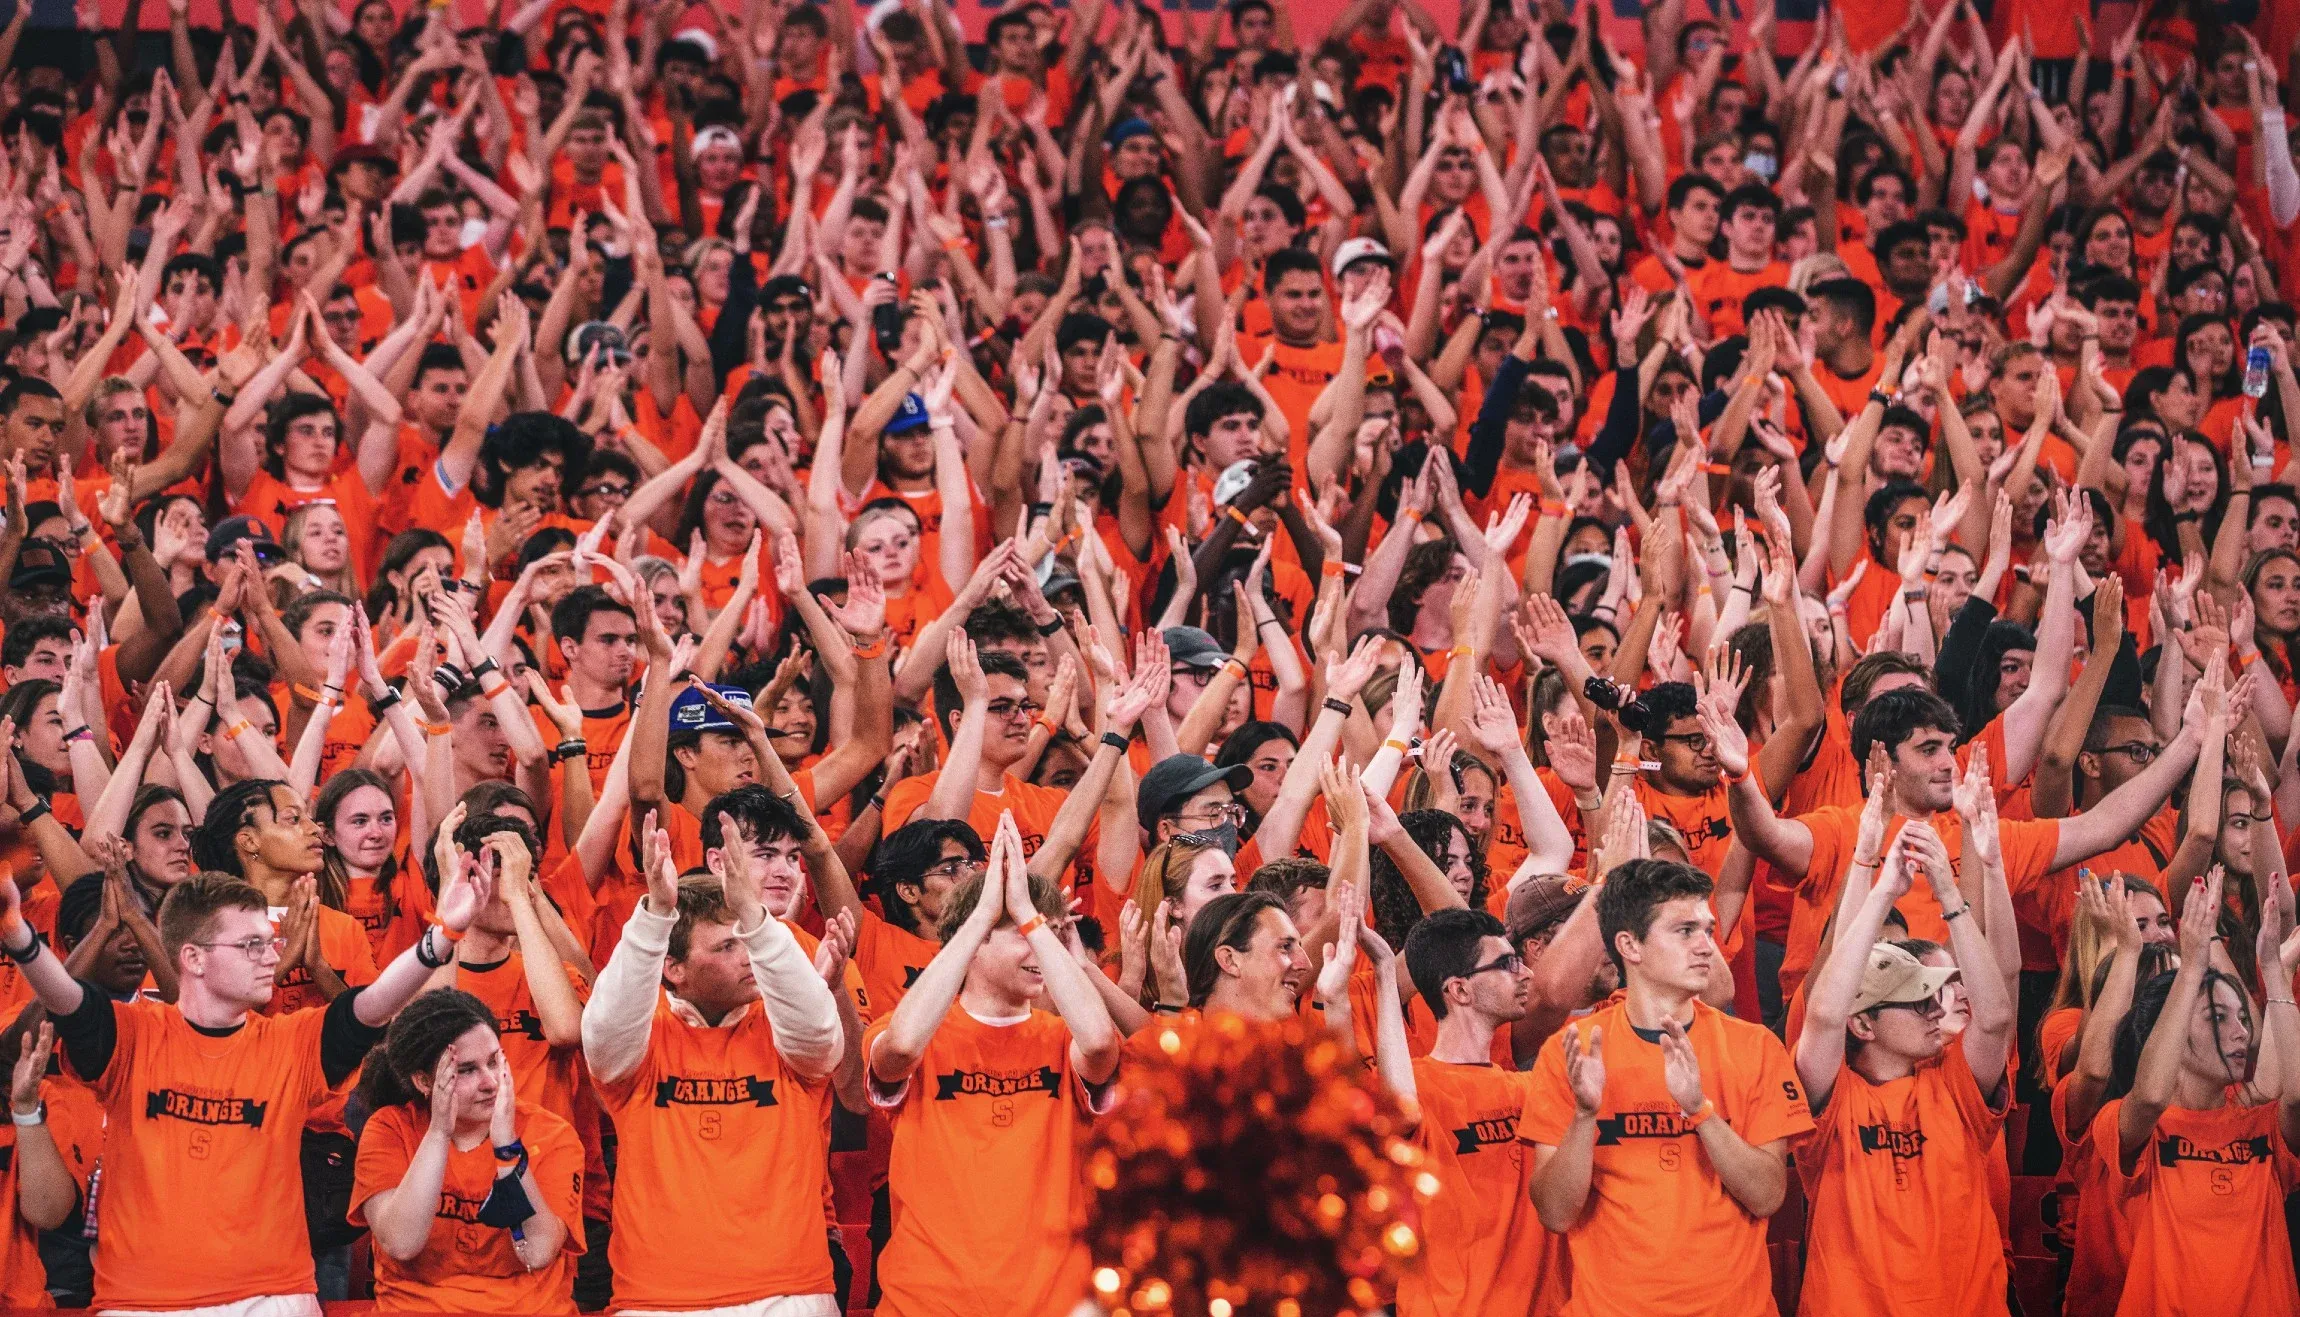 A large group of students wearing orange shirts cheering.